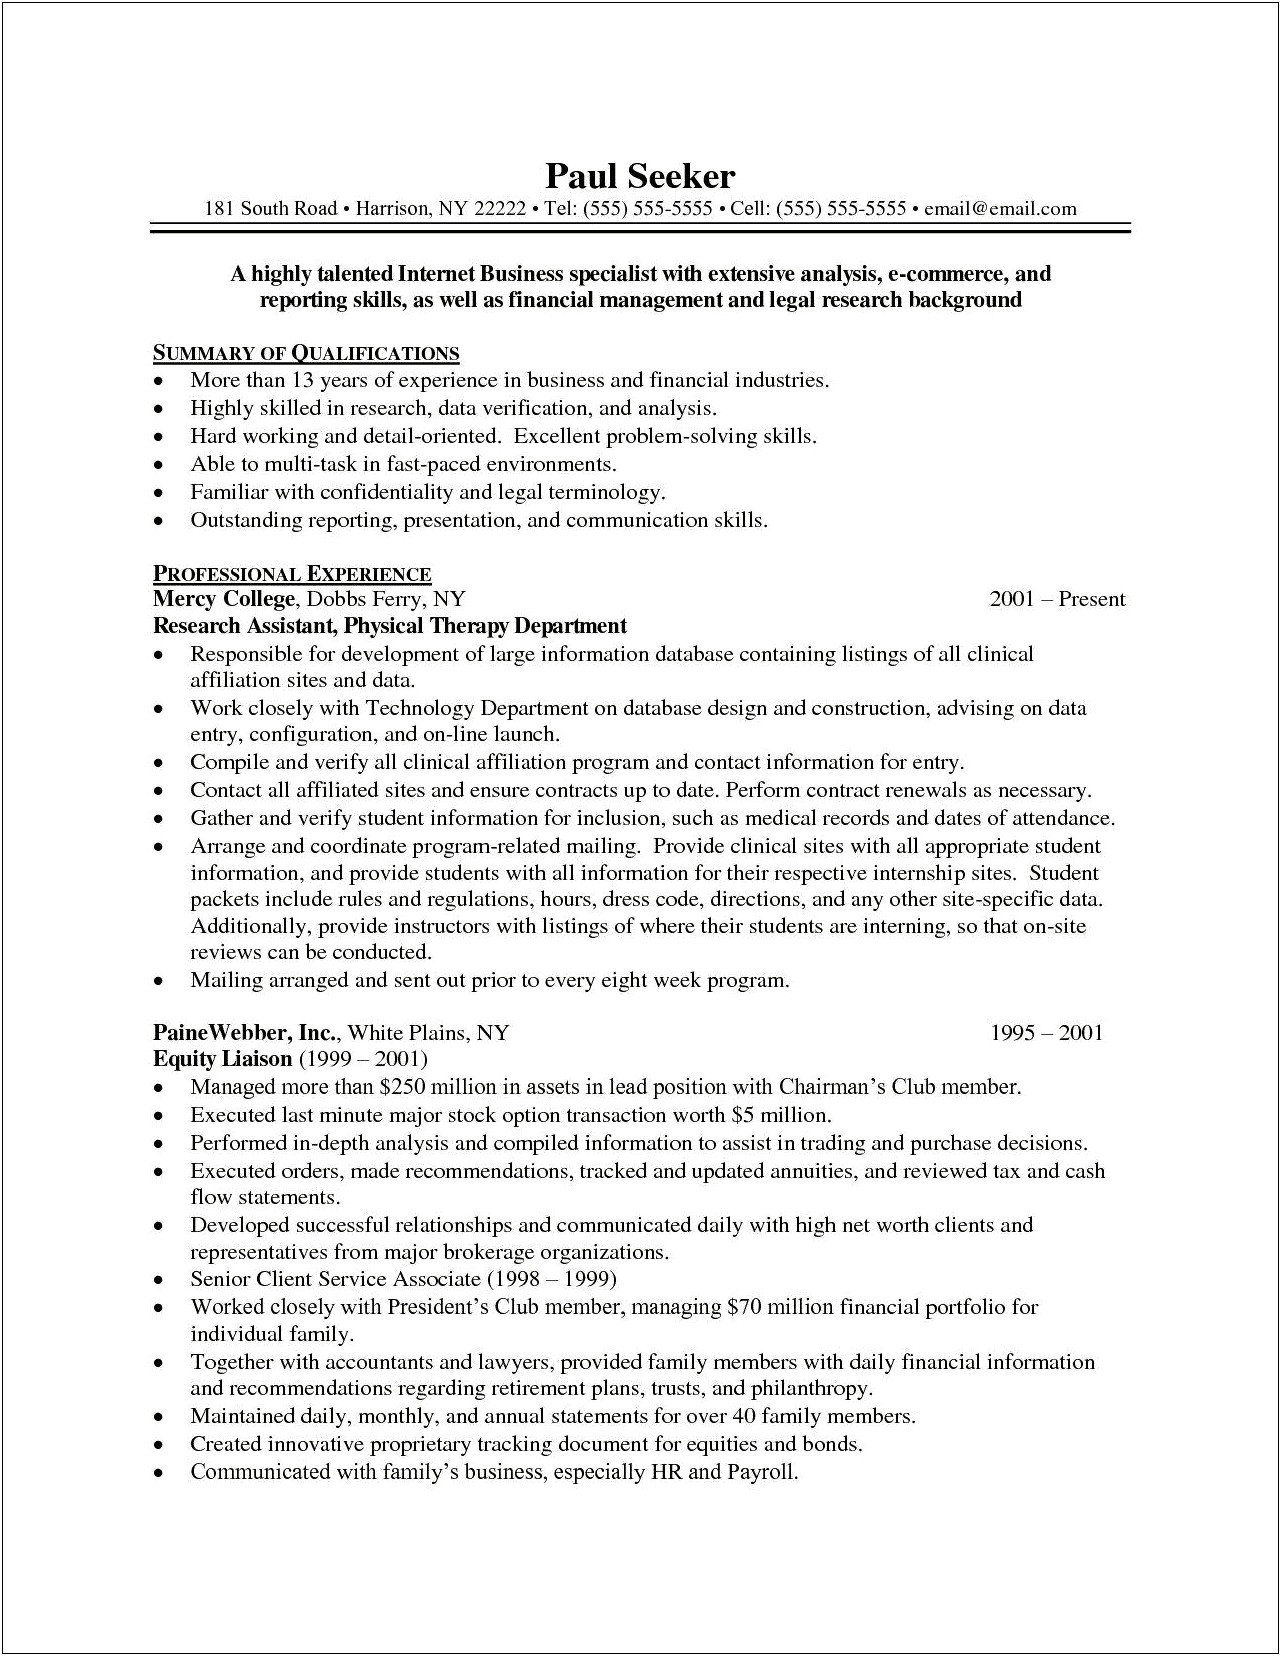 Sample Of Accounts Payable Specialist Resume